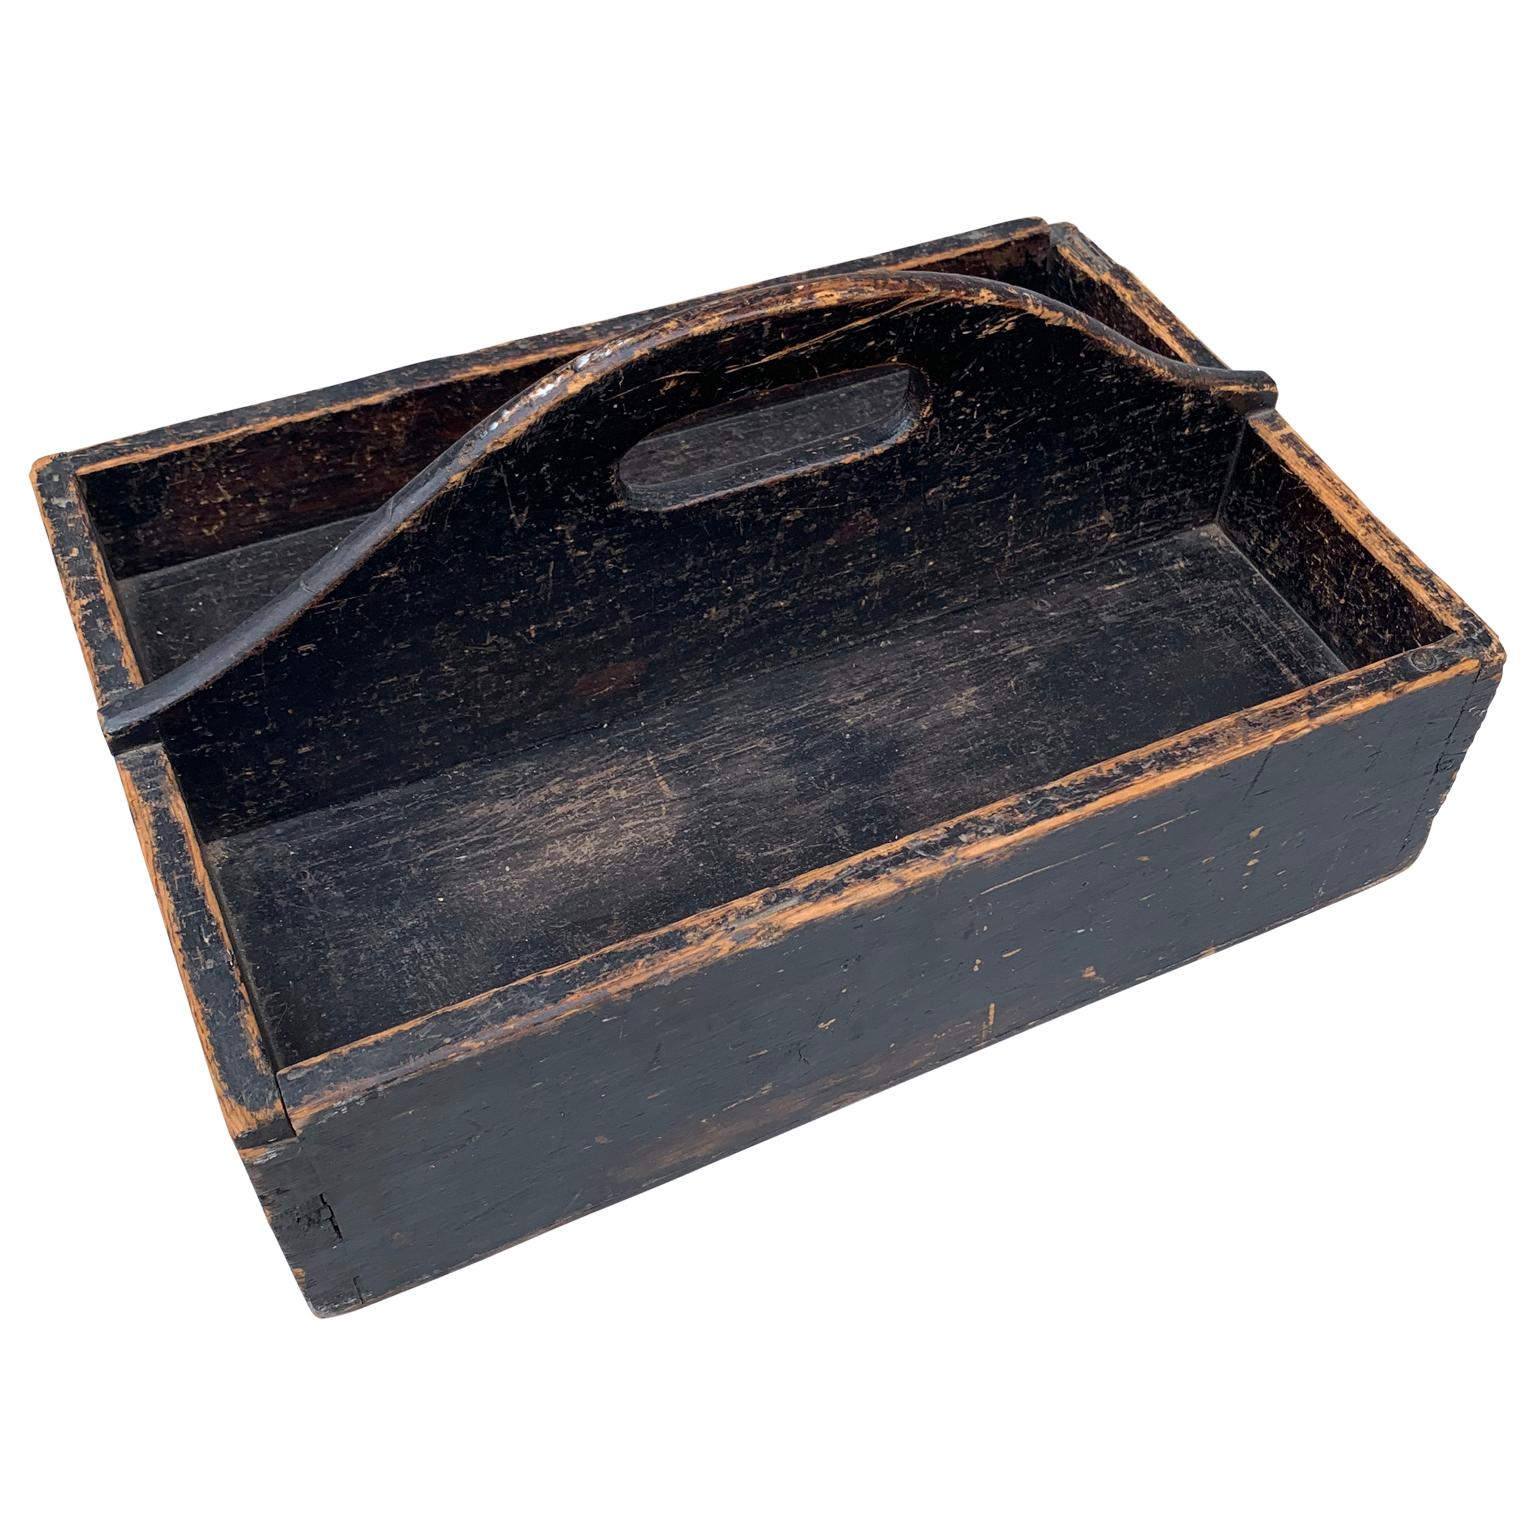 Early 19th century Scandinavian Folk Art kitchen silverware and spices box in old black color.